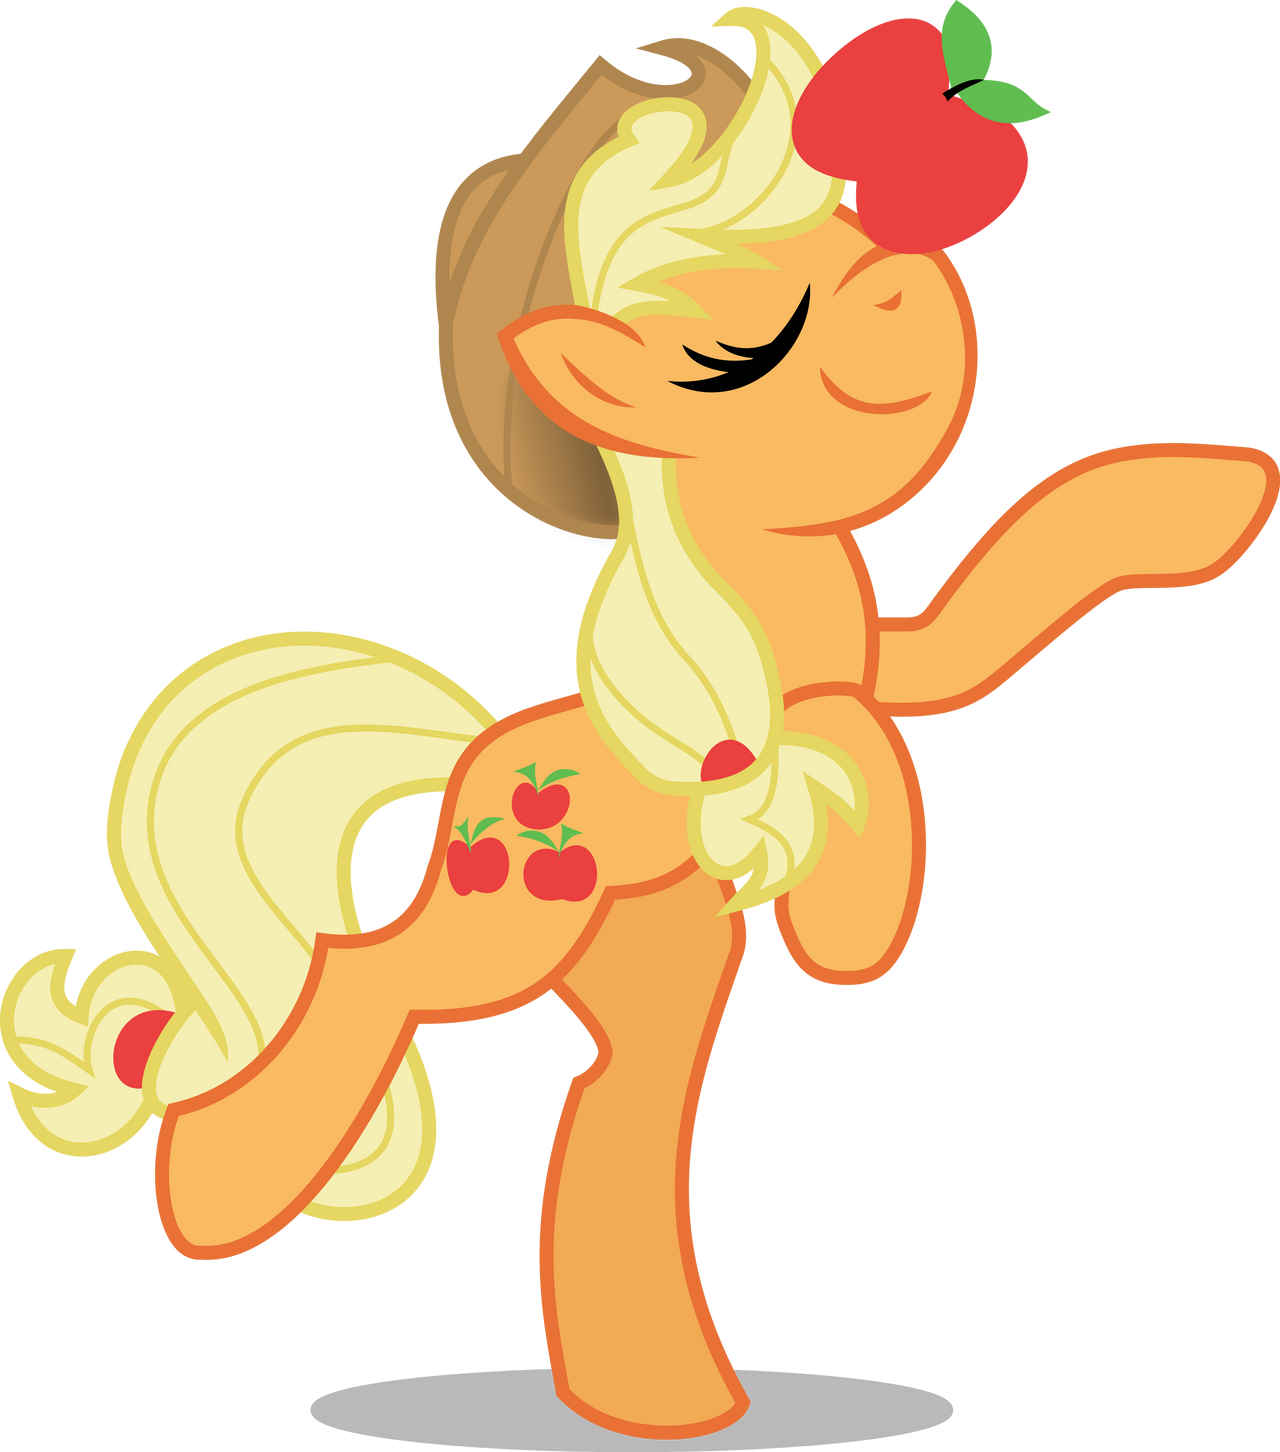 applejack___honesty__and_balance__by_canon_lb-d5fooql.png